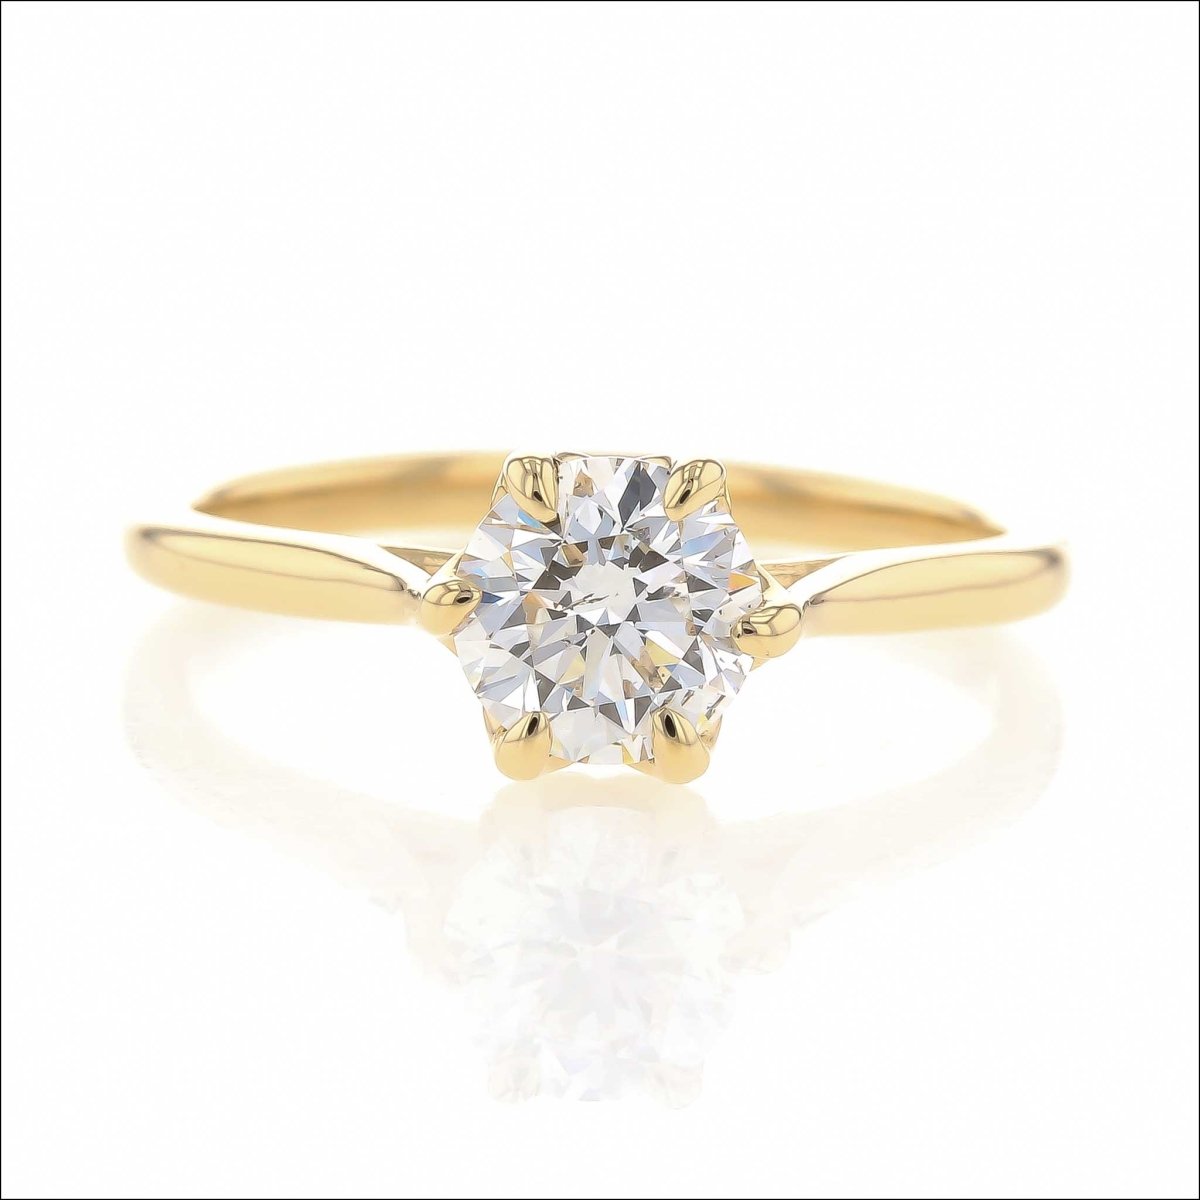 Diamond Floral Engagement Ring 14KY - JewelsmithEngagement Rings